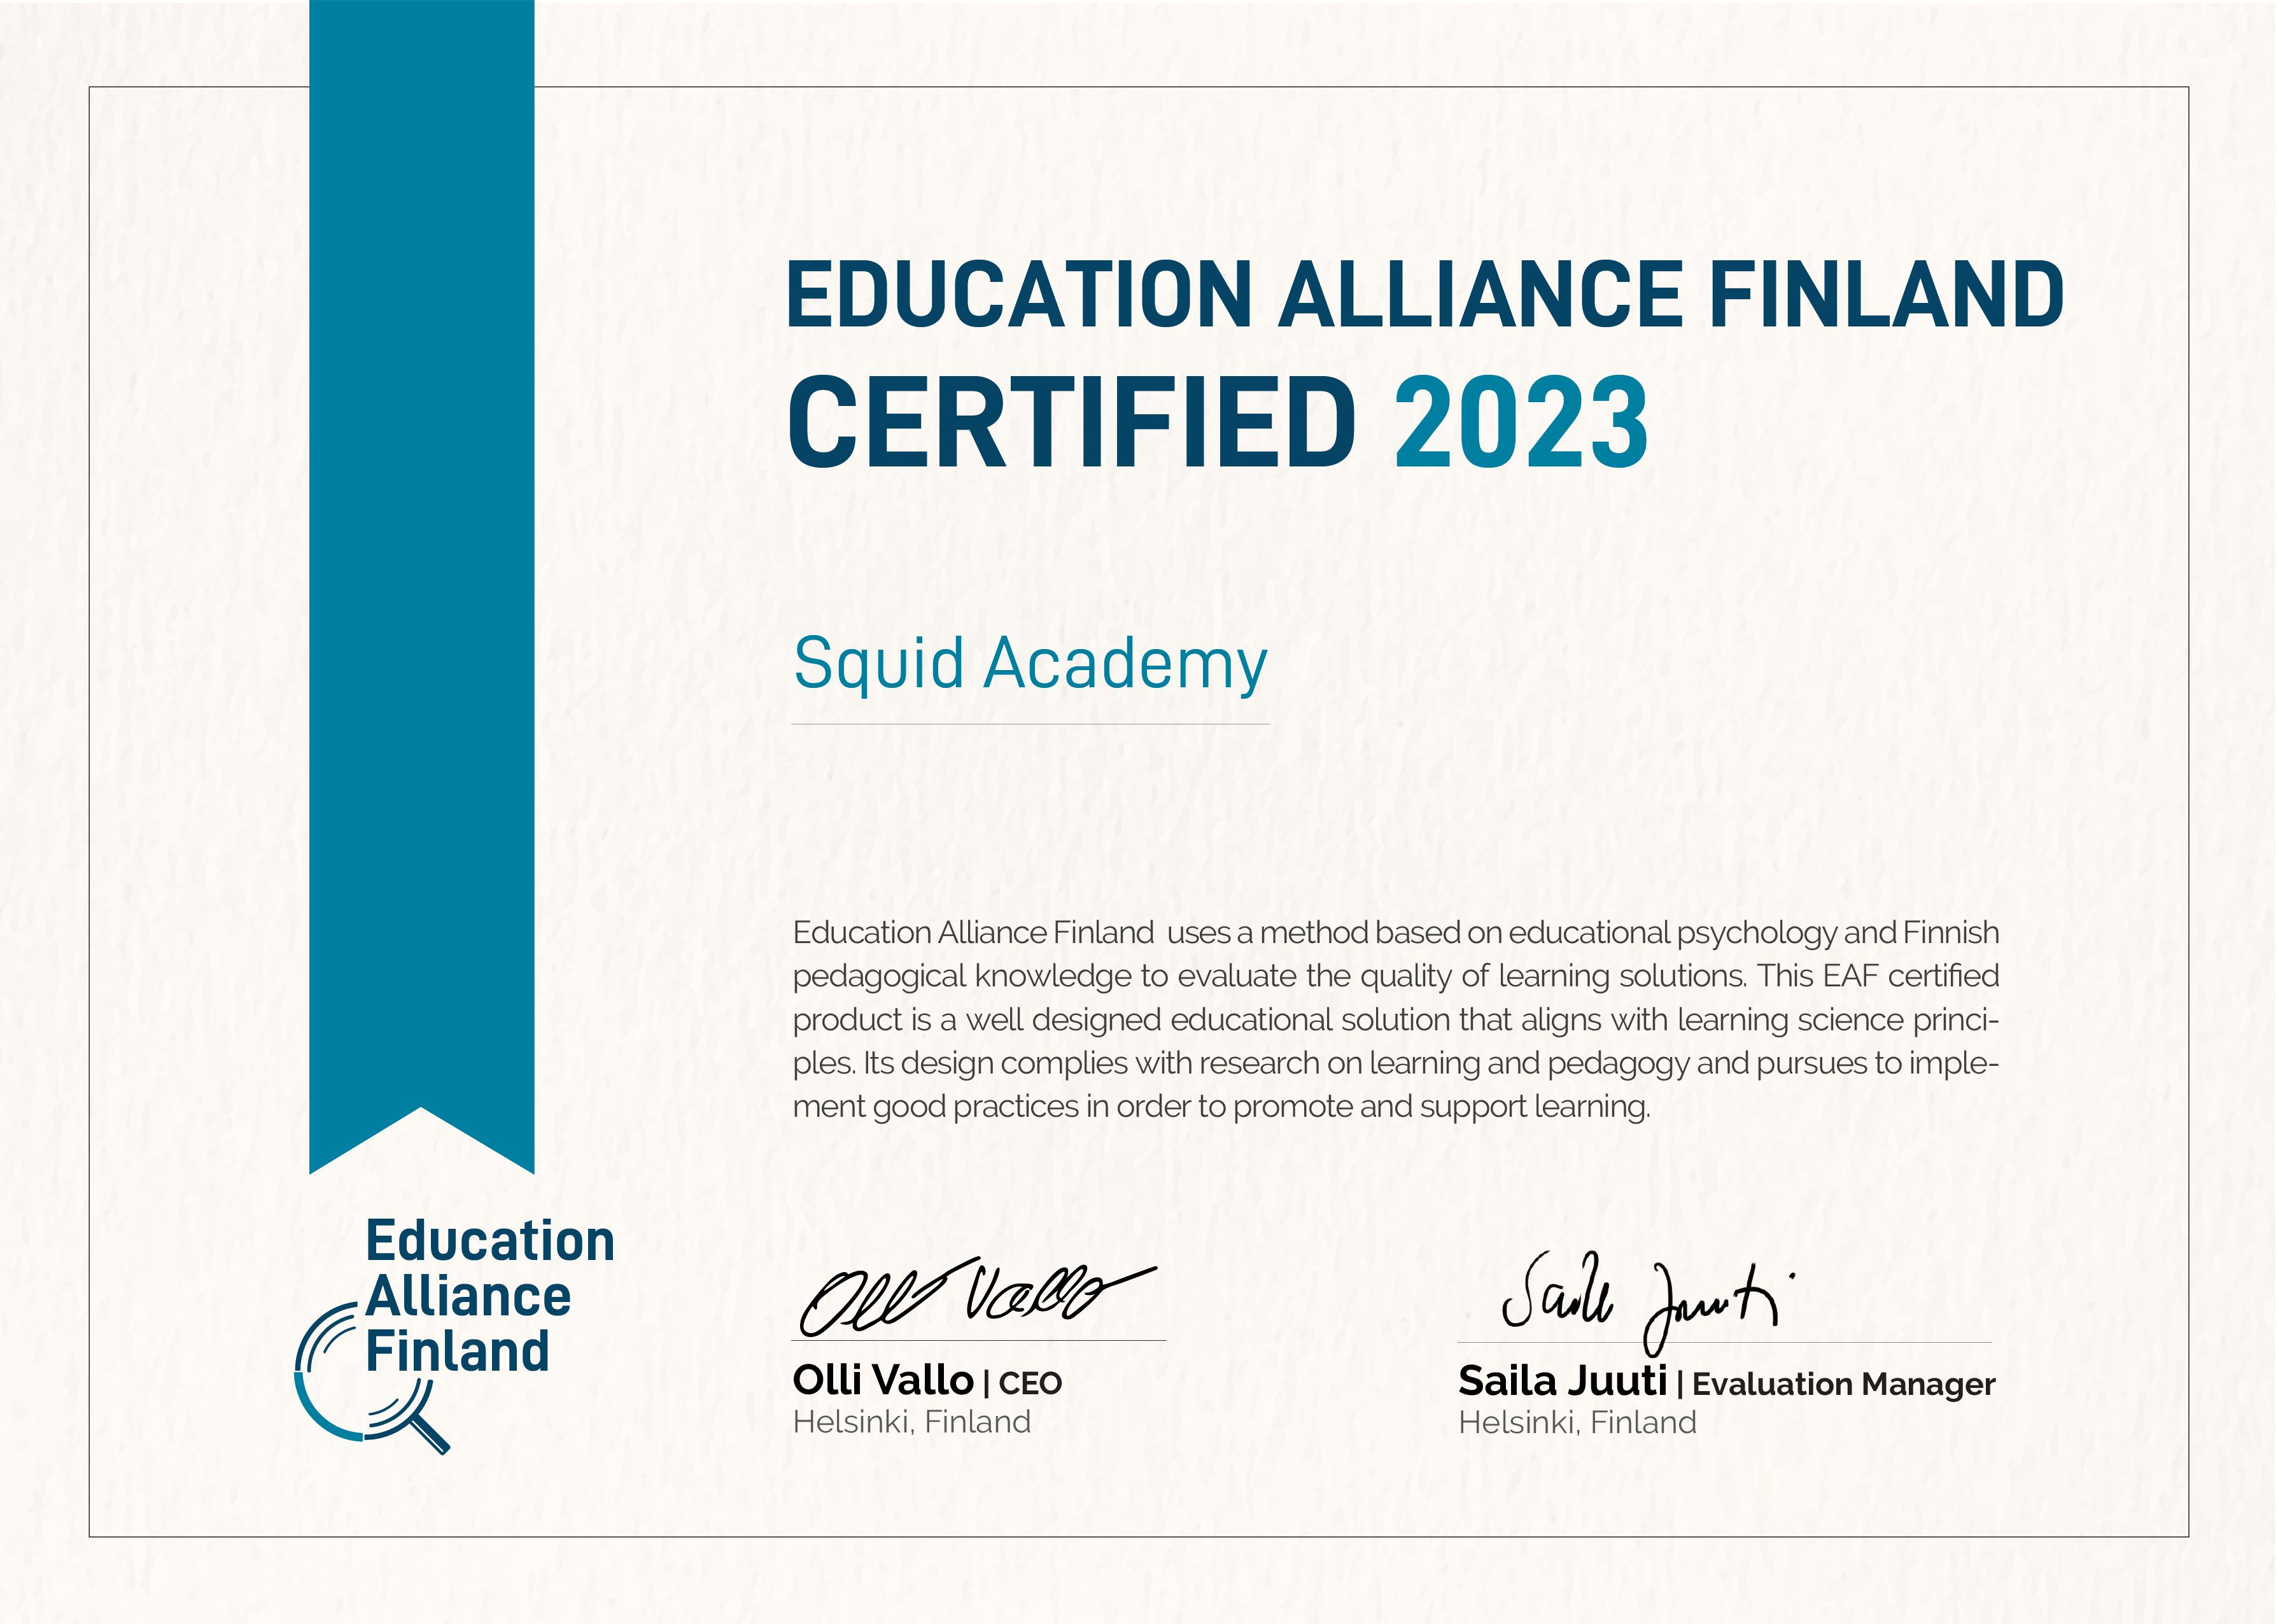 Squid Academy's Certificate of Accreditation from Education Alliance Finland